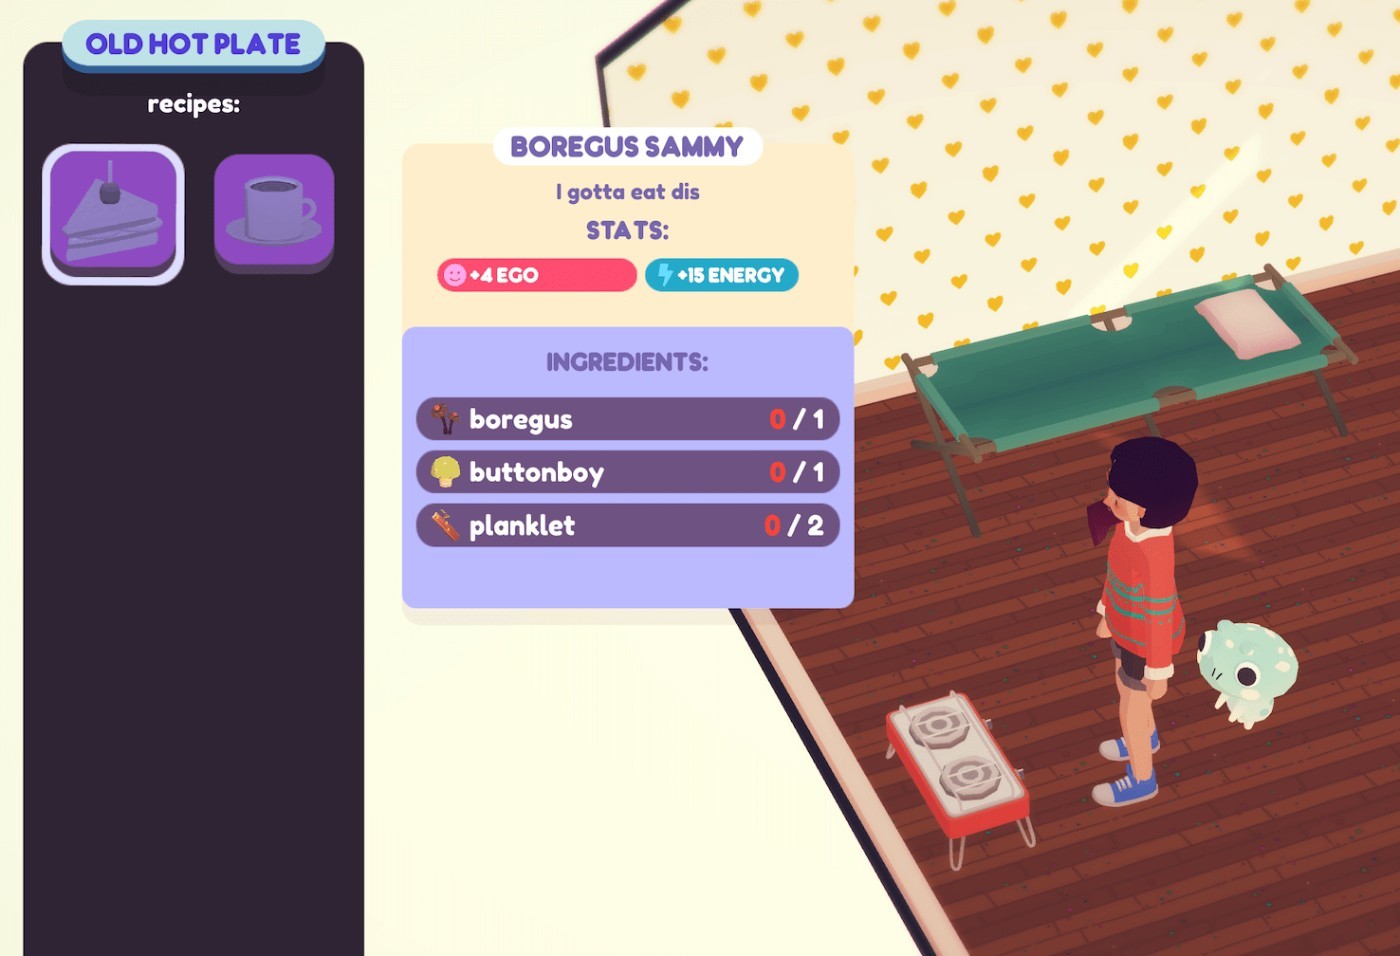 download free ooblets steam